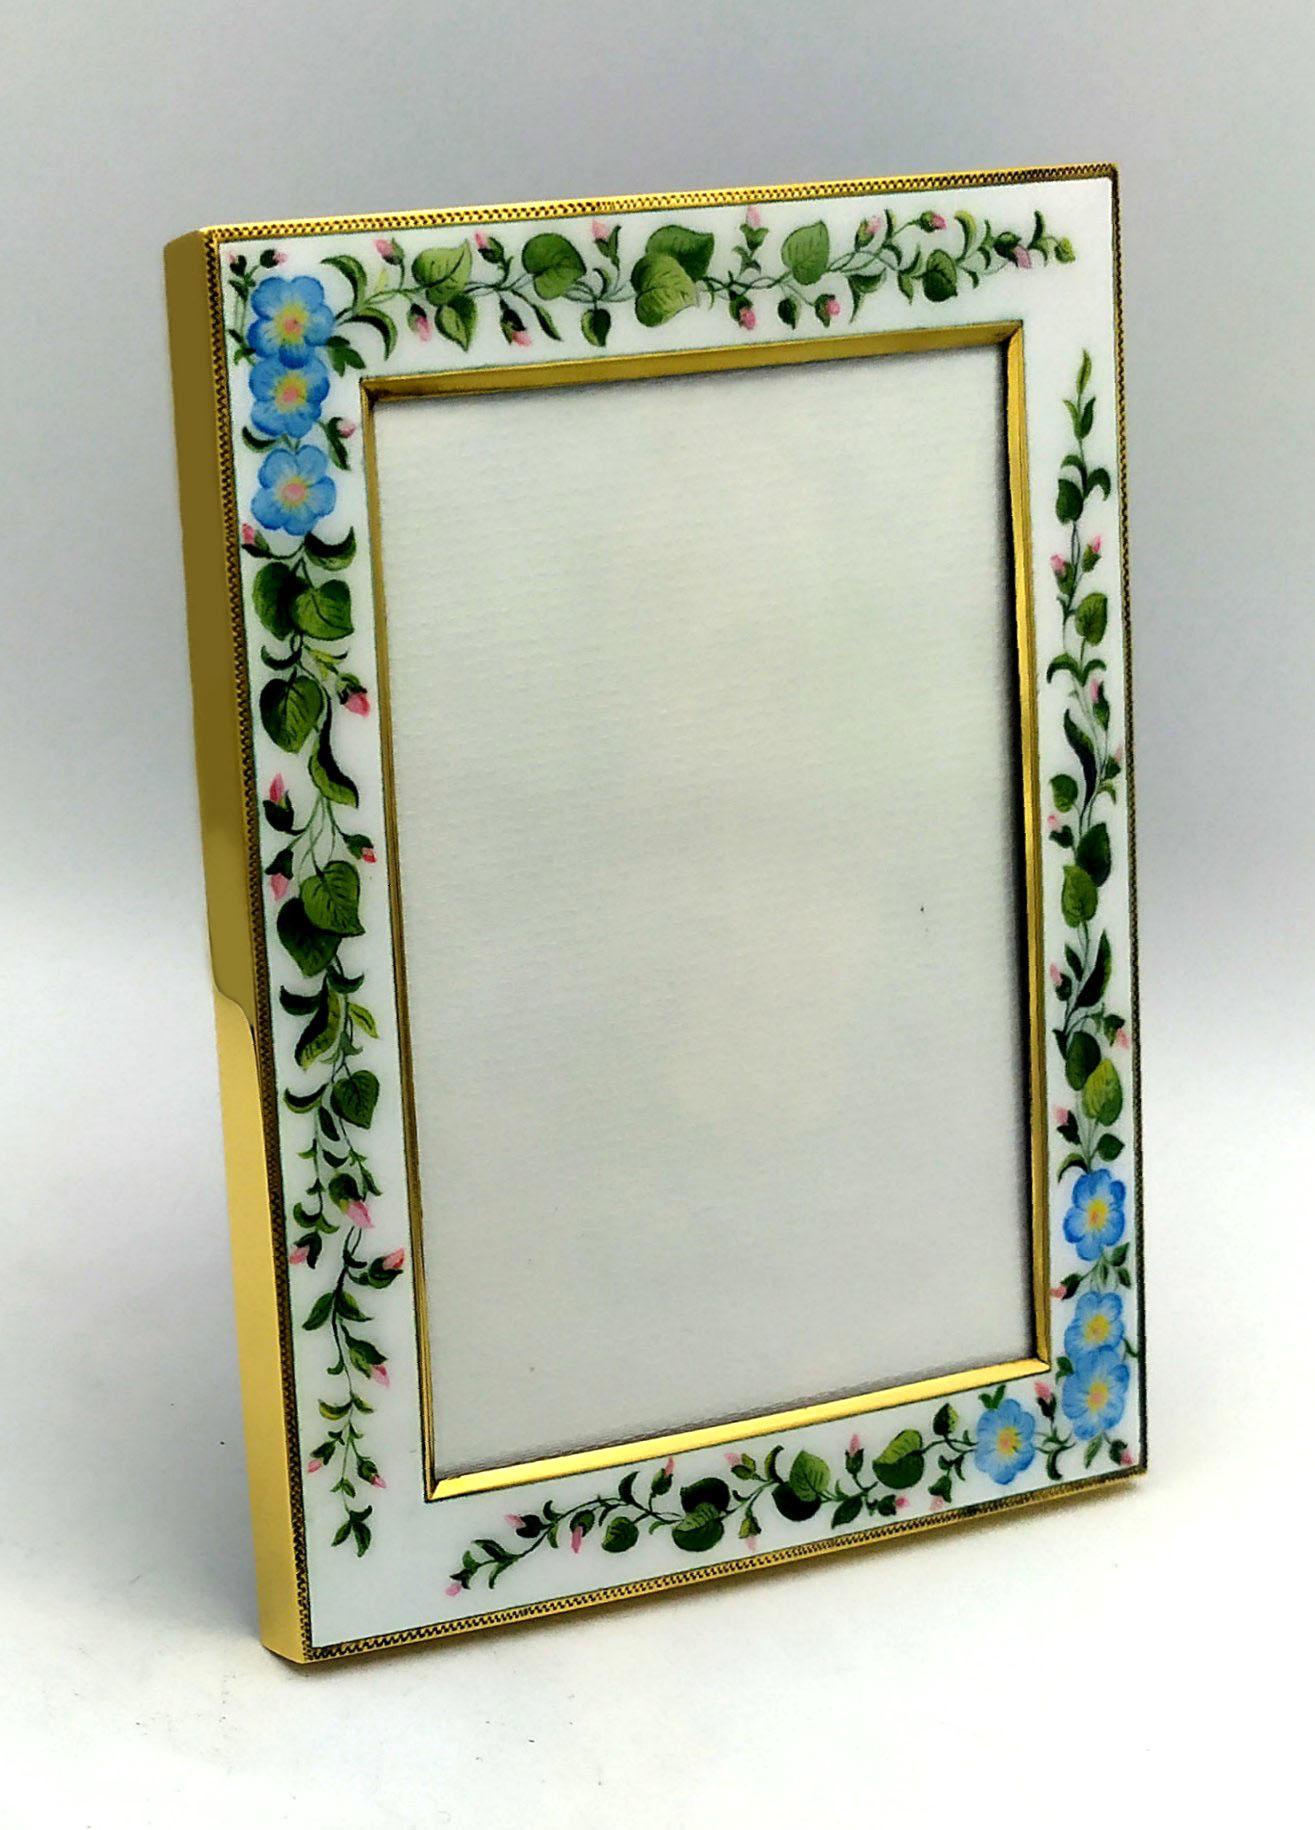 Rectangular photo frame in 925/1000 sterling silver gold plated with hand-painted floral miniature by the painter Renato Dainelli, fire-enamelled on a white background in Art Nouveau style, early 1900s. External measurements cm. 14.7 x 18.7.